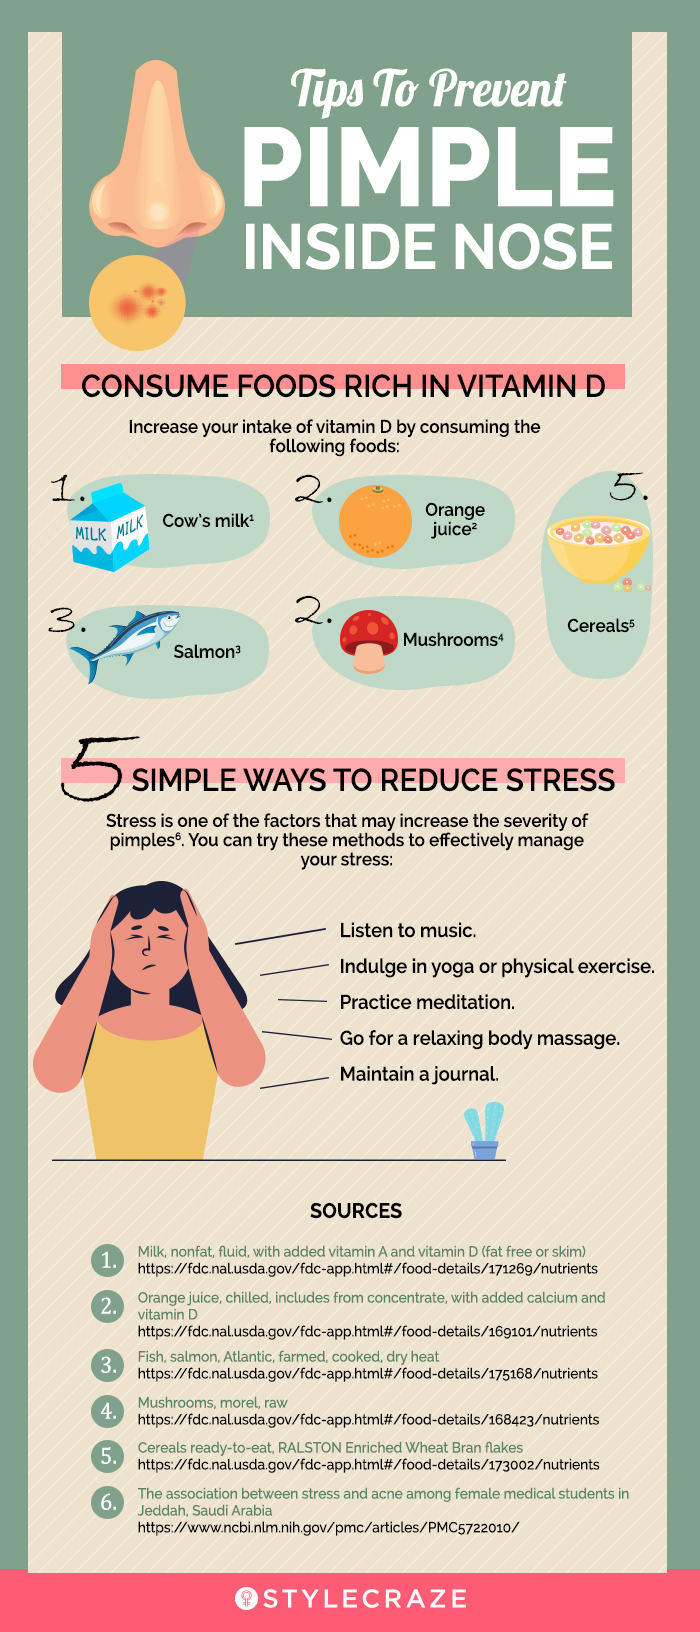 tips to prevent pimple inside nose (infographic)